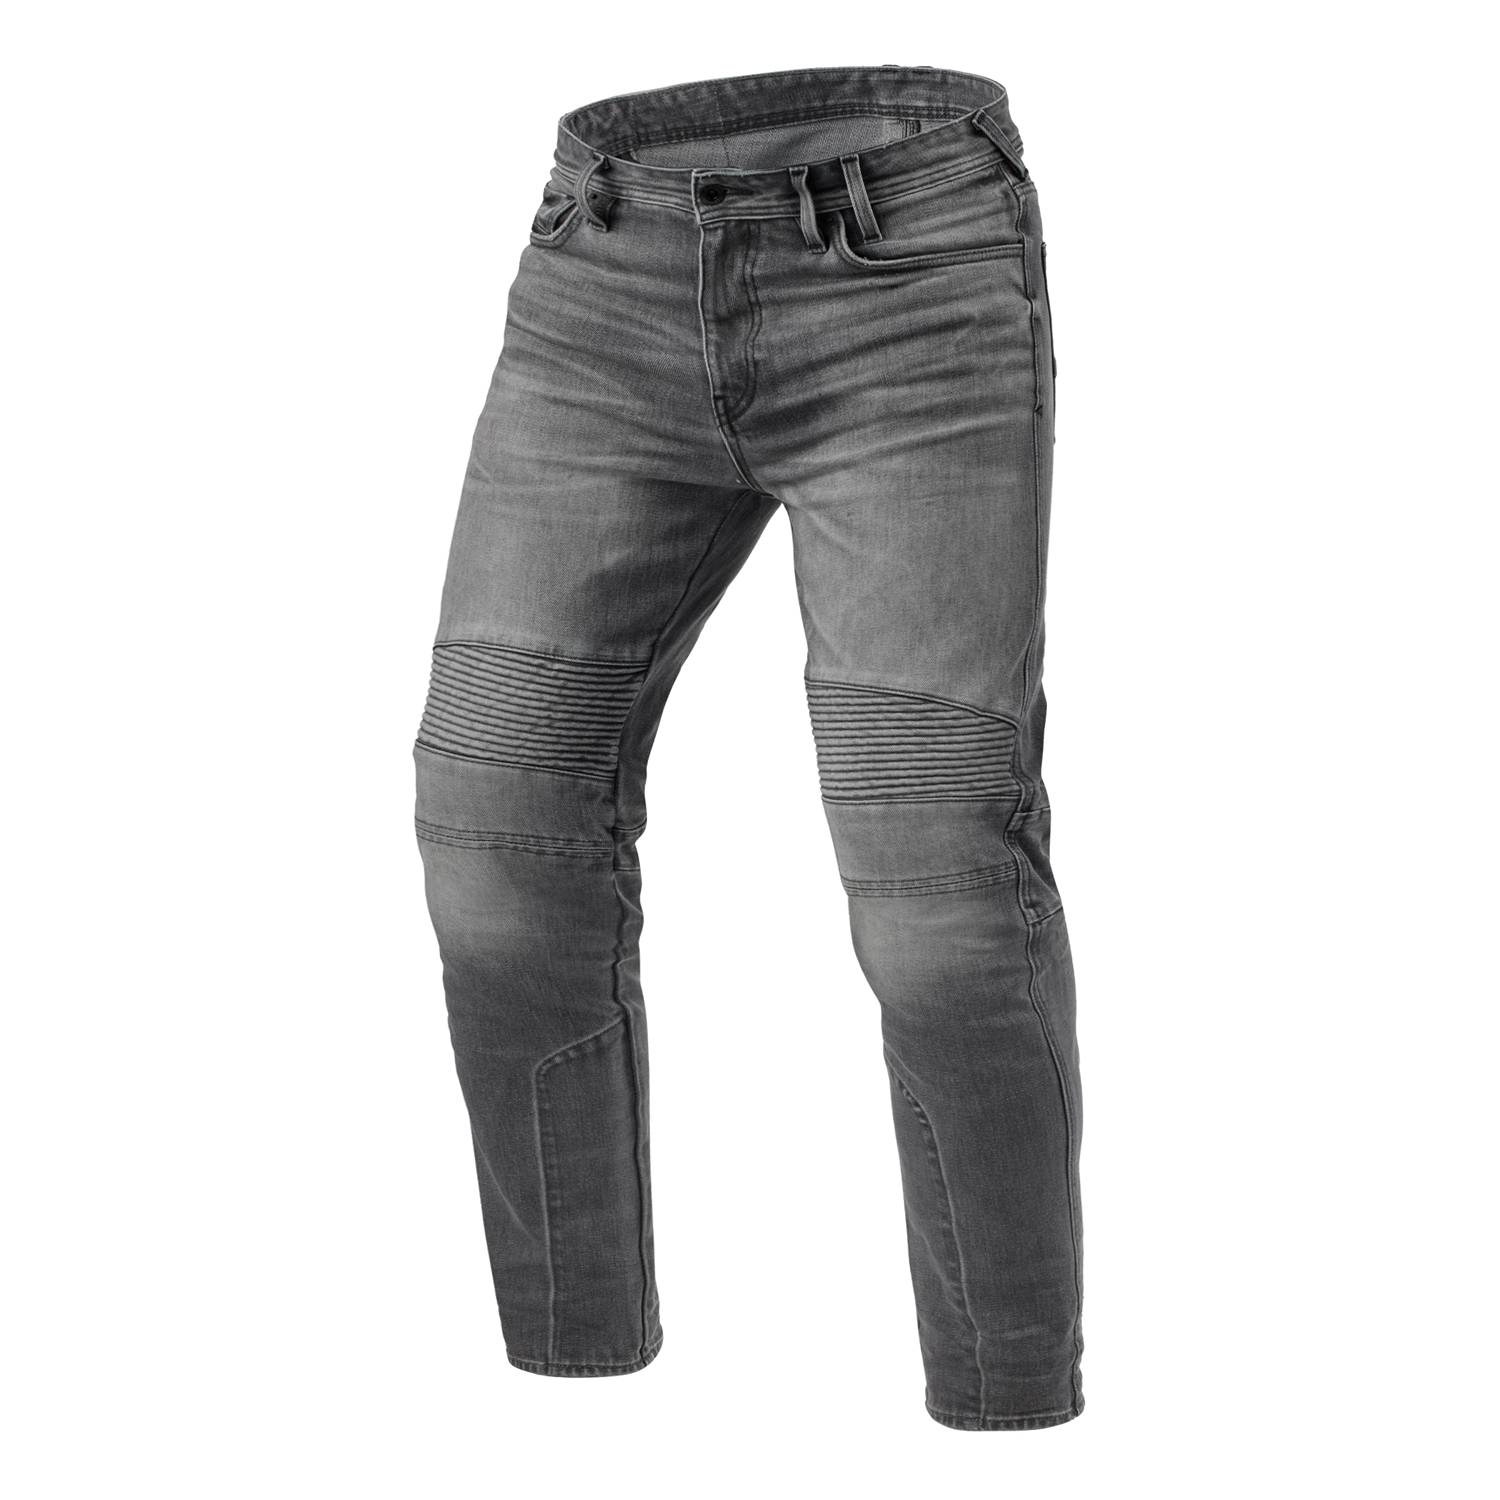 Image of REV'IT! Jeans Moto 2 TF Medium Grey Used L36 Motorcycle Jeans Taille L36/W30